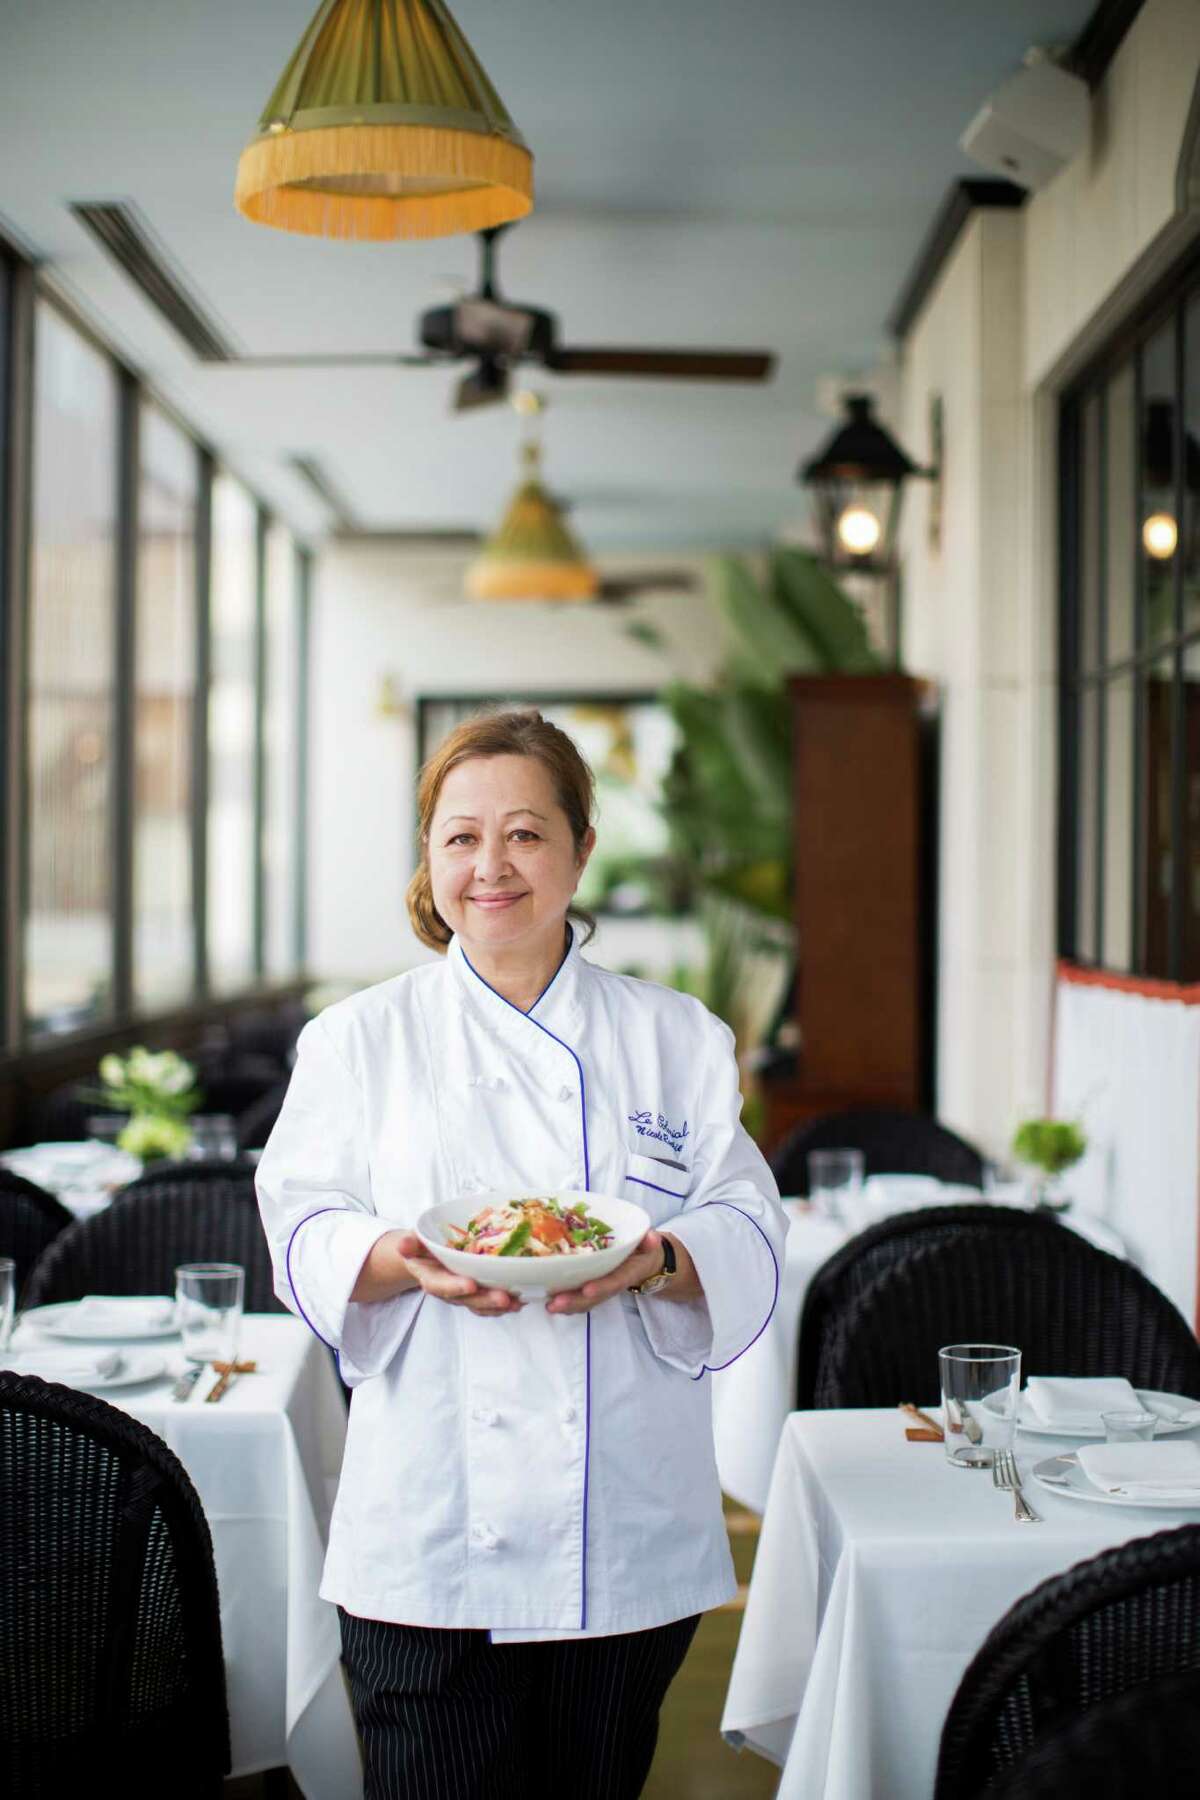 Nicole Routhier, a Houston cooking instructor and author of "The Foods of Vietnam," joined the team at the new Le Colonial restaurant at River Oaks District as partner and culinary director.